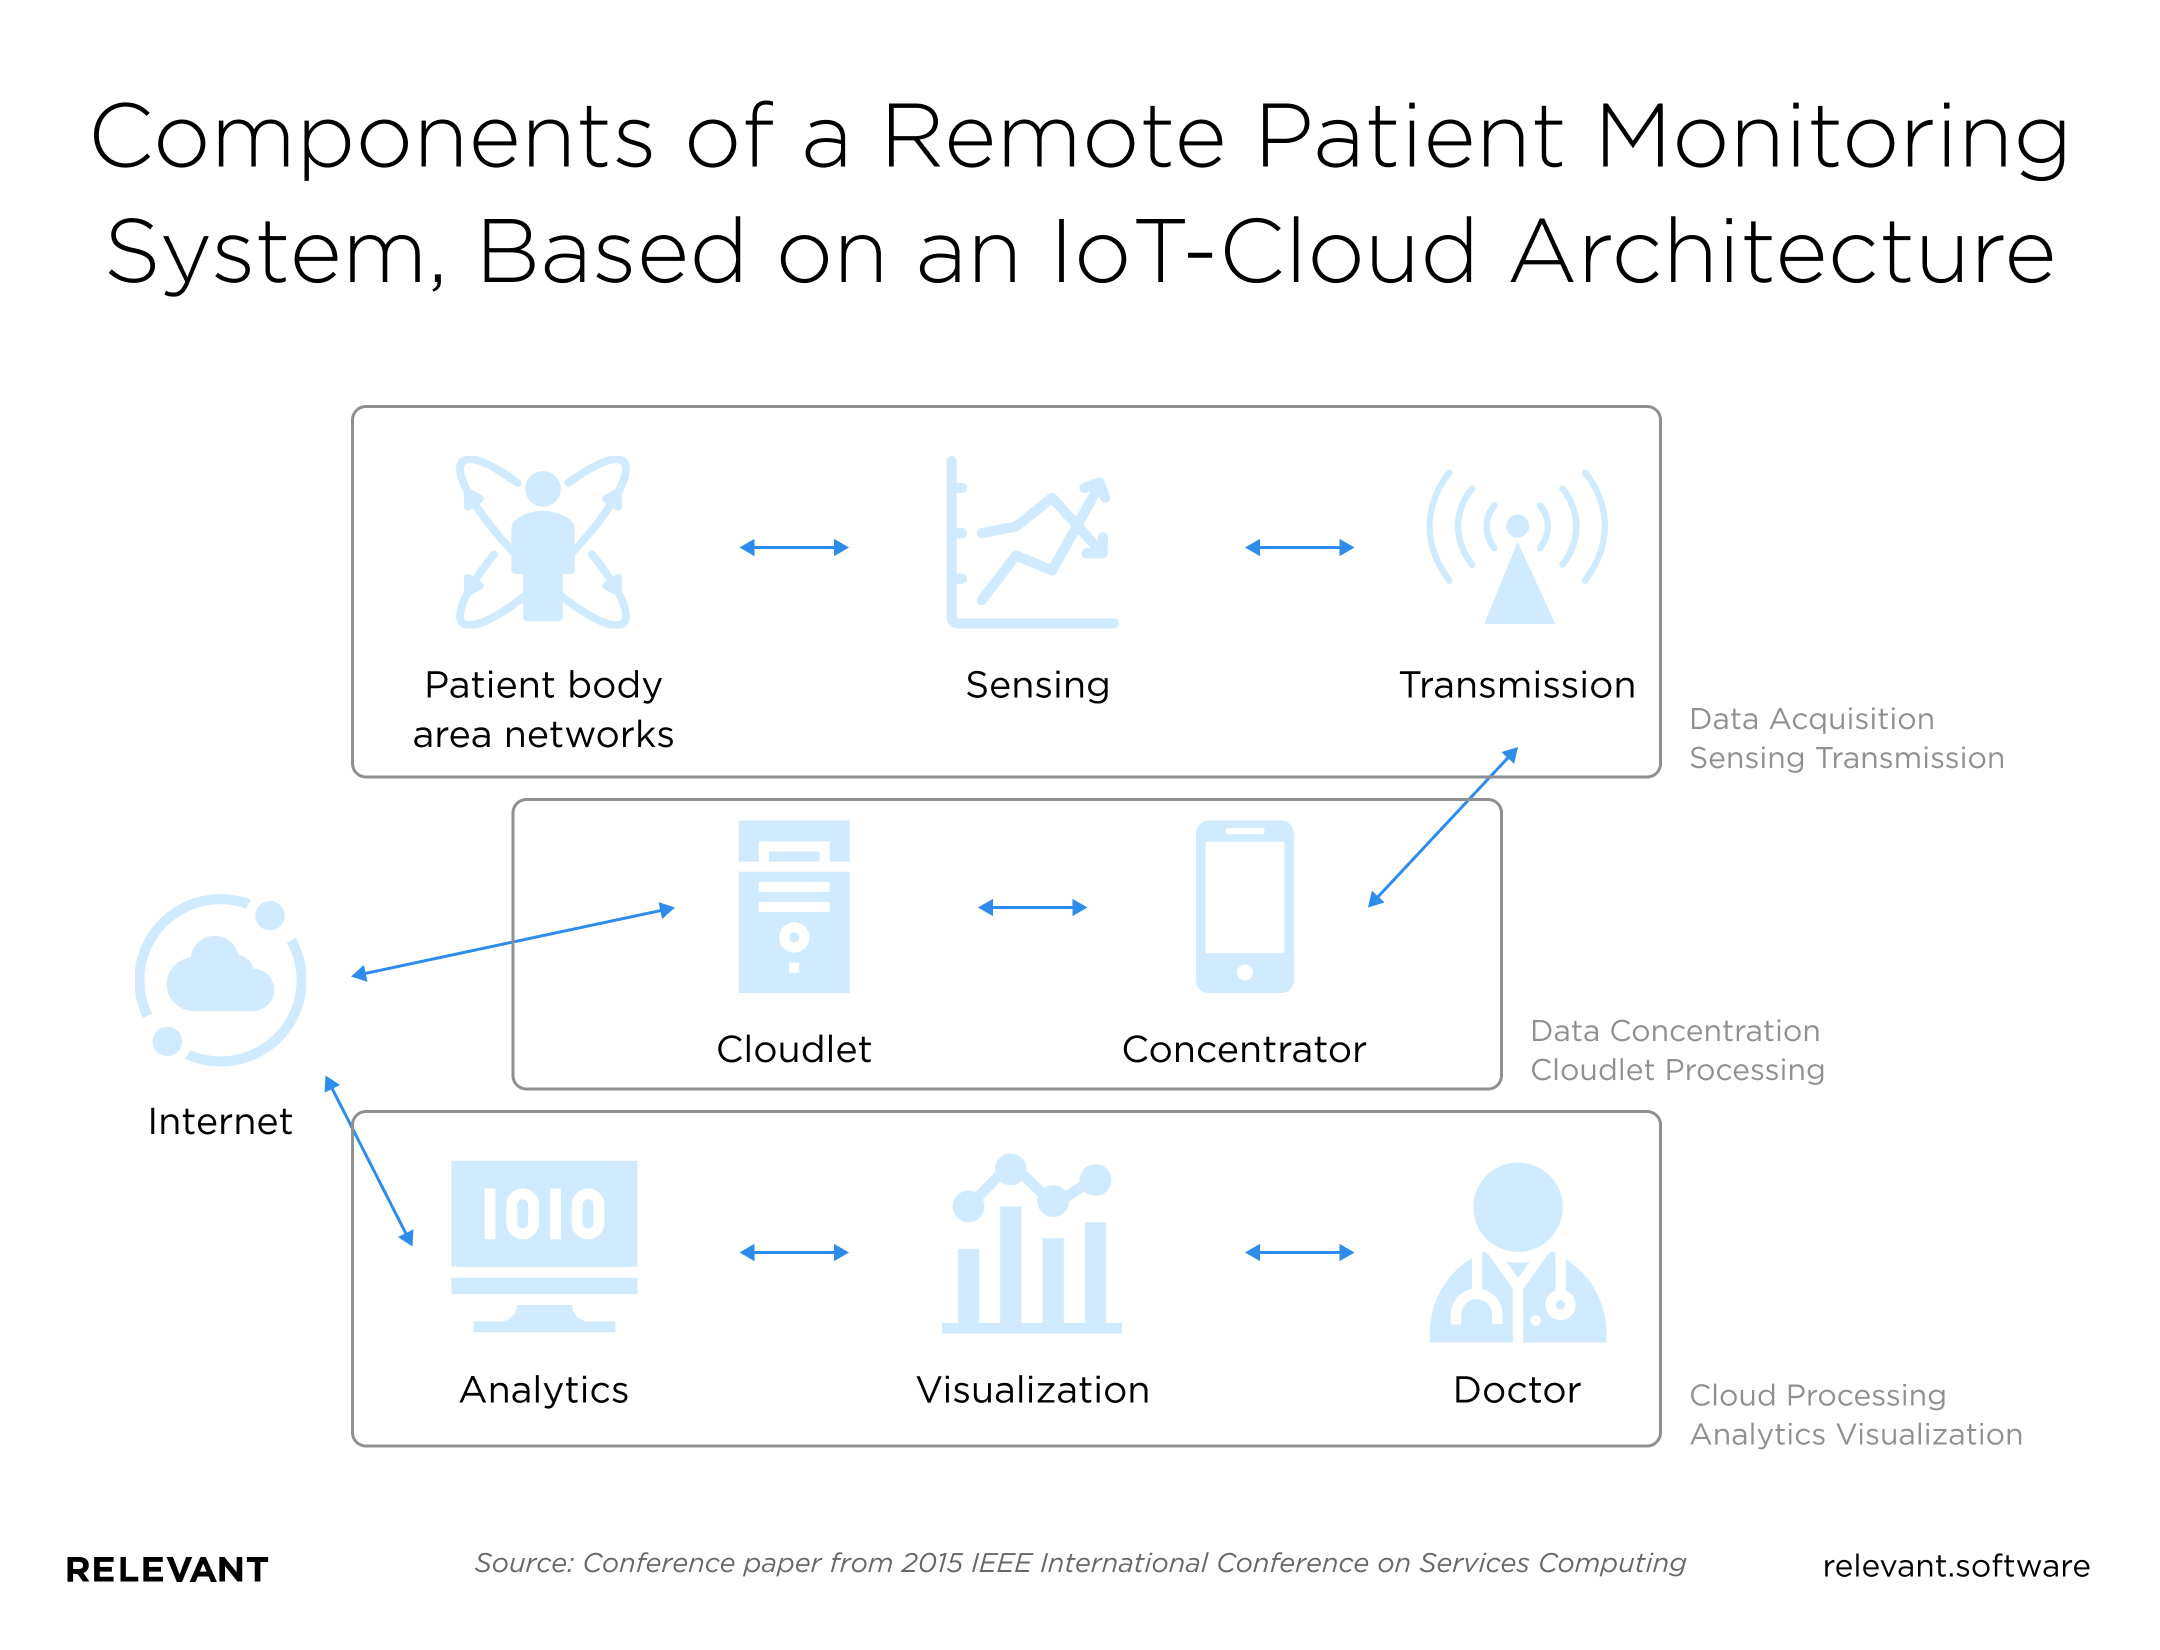 Components of a Remote Patient Monitoring System, Based on an IoT-Cloud Architecture